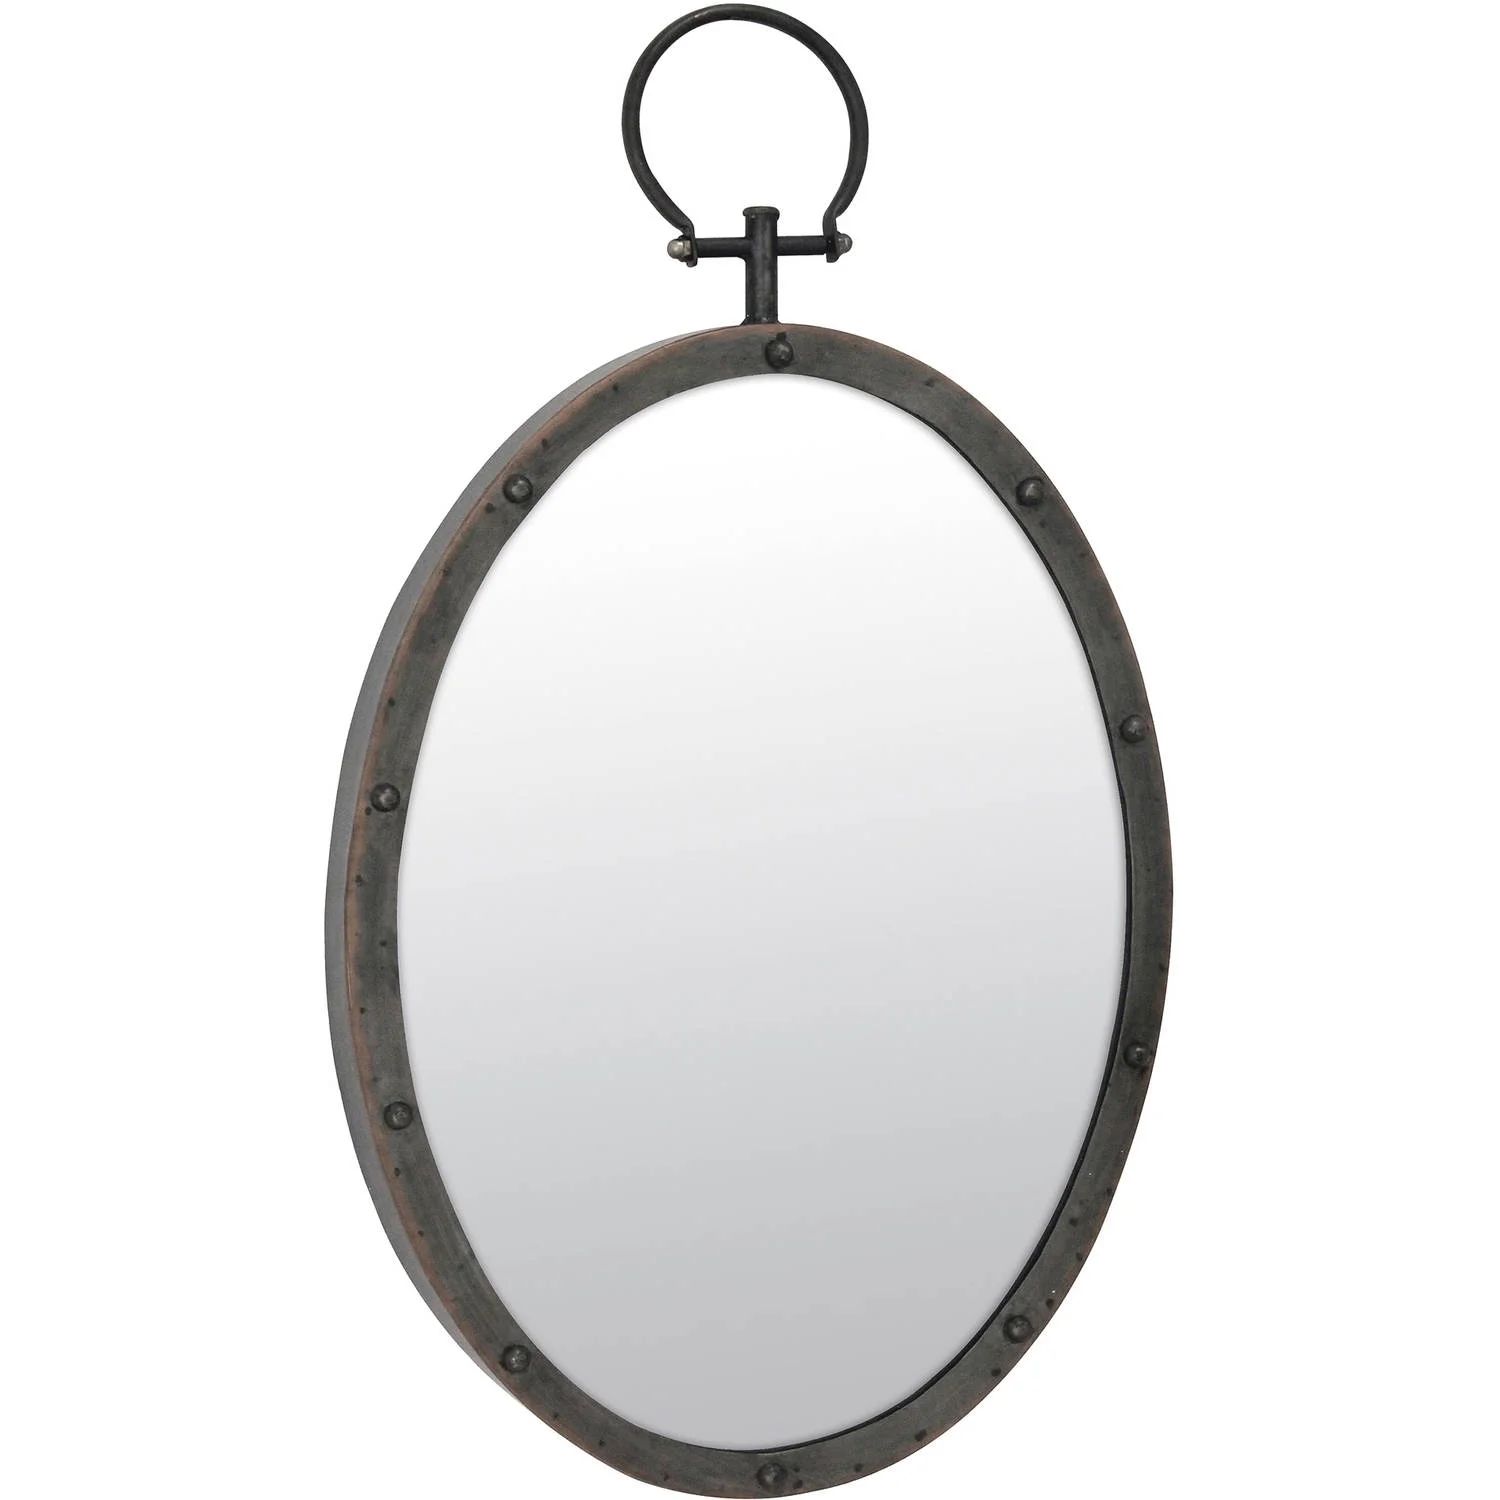 Stonebriar Collection Metal Oval Mirror with Ring and Rivet Trim | Walmart (US)